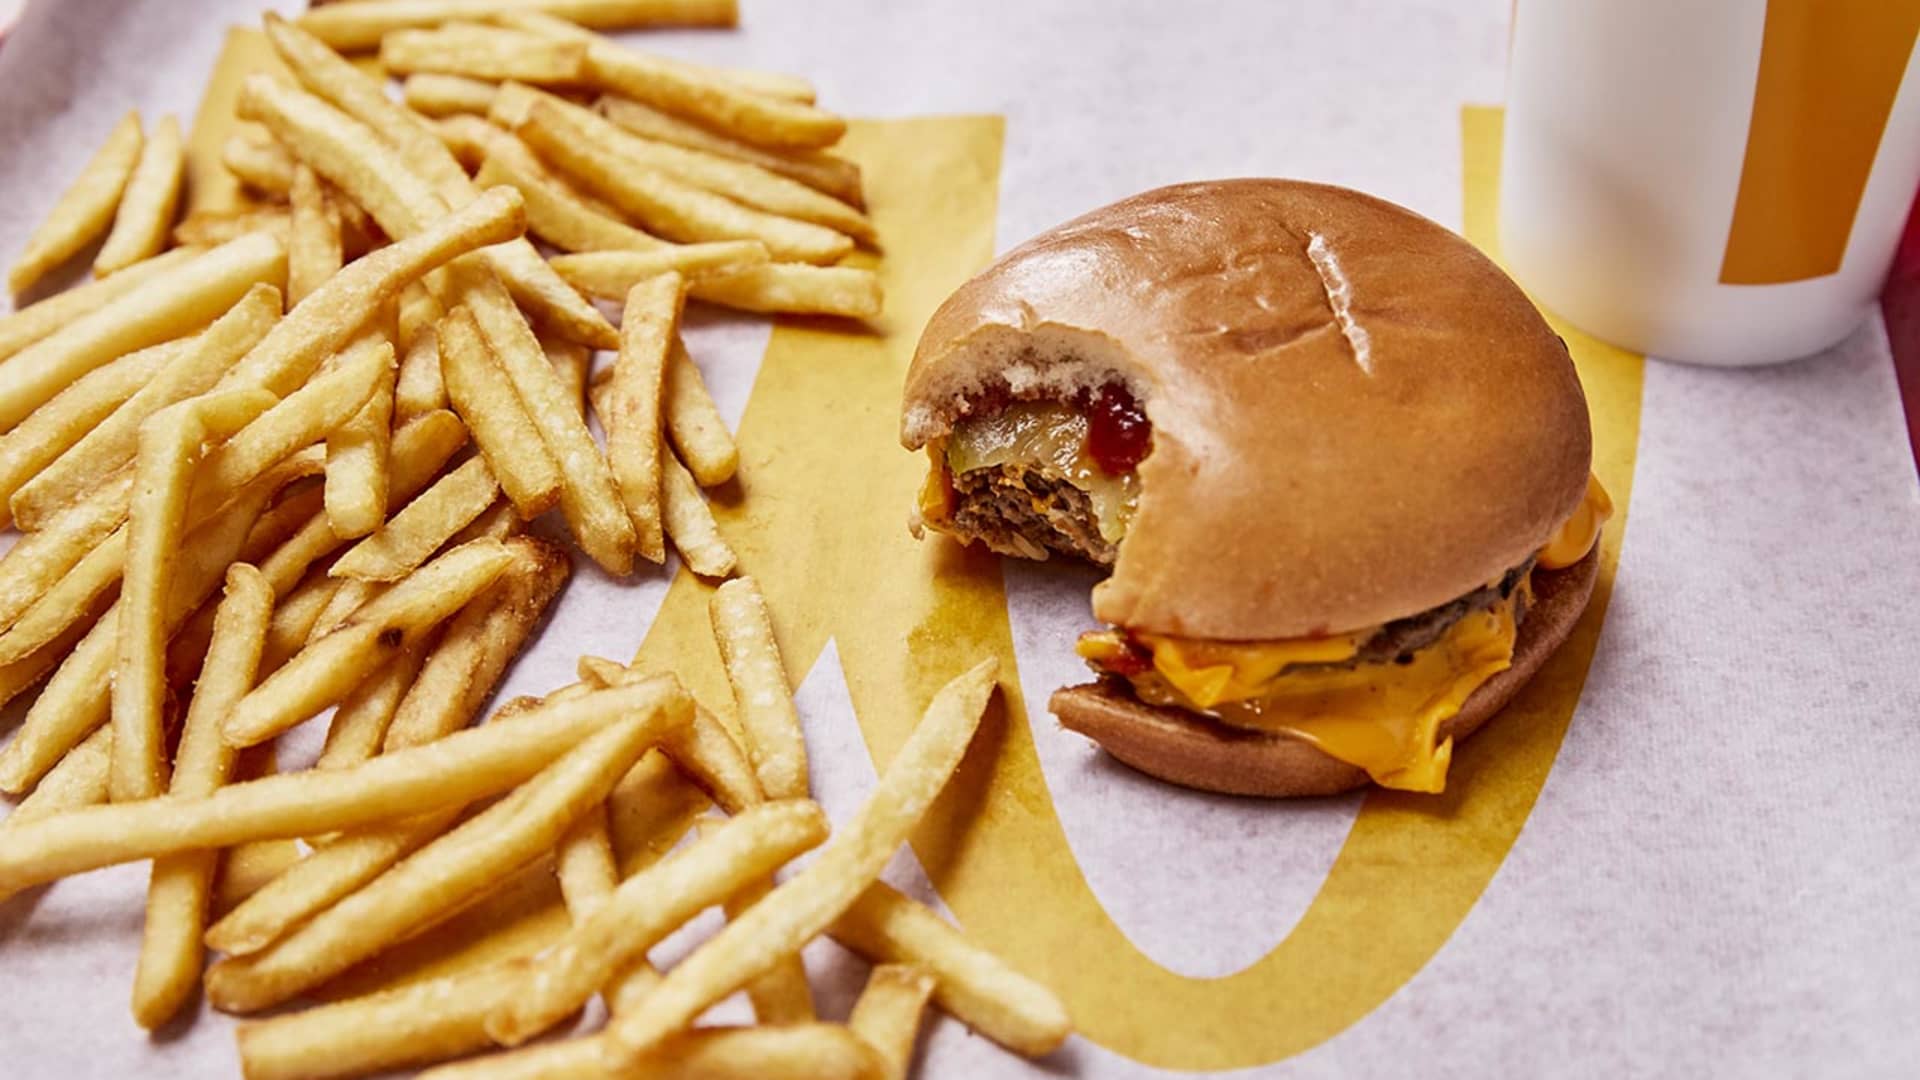 McDonald’s is selling 50-cent double cheeseburgers for National Cheeseburger Day, Wendy’s is giving them out for a penny